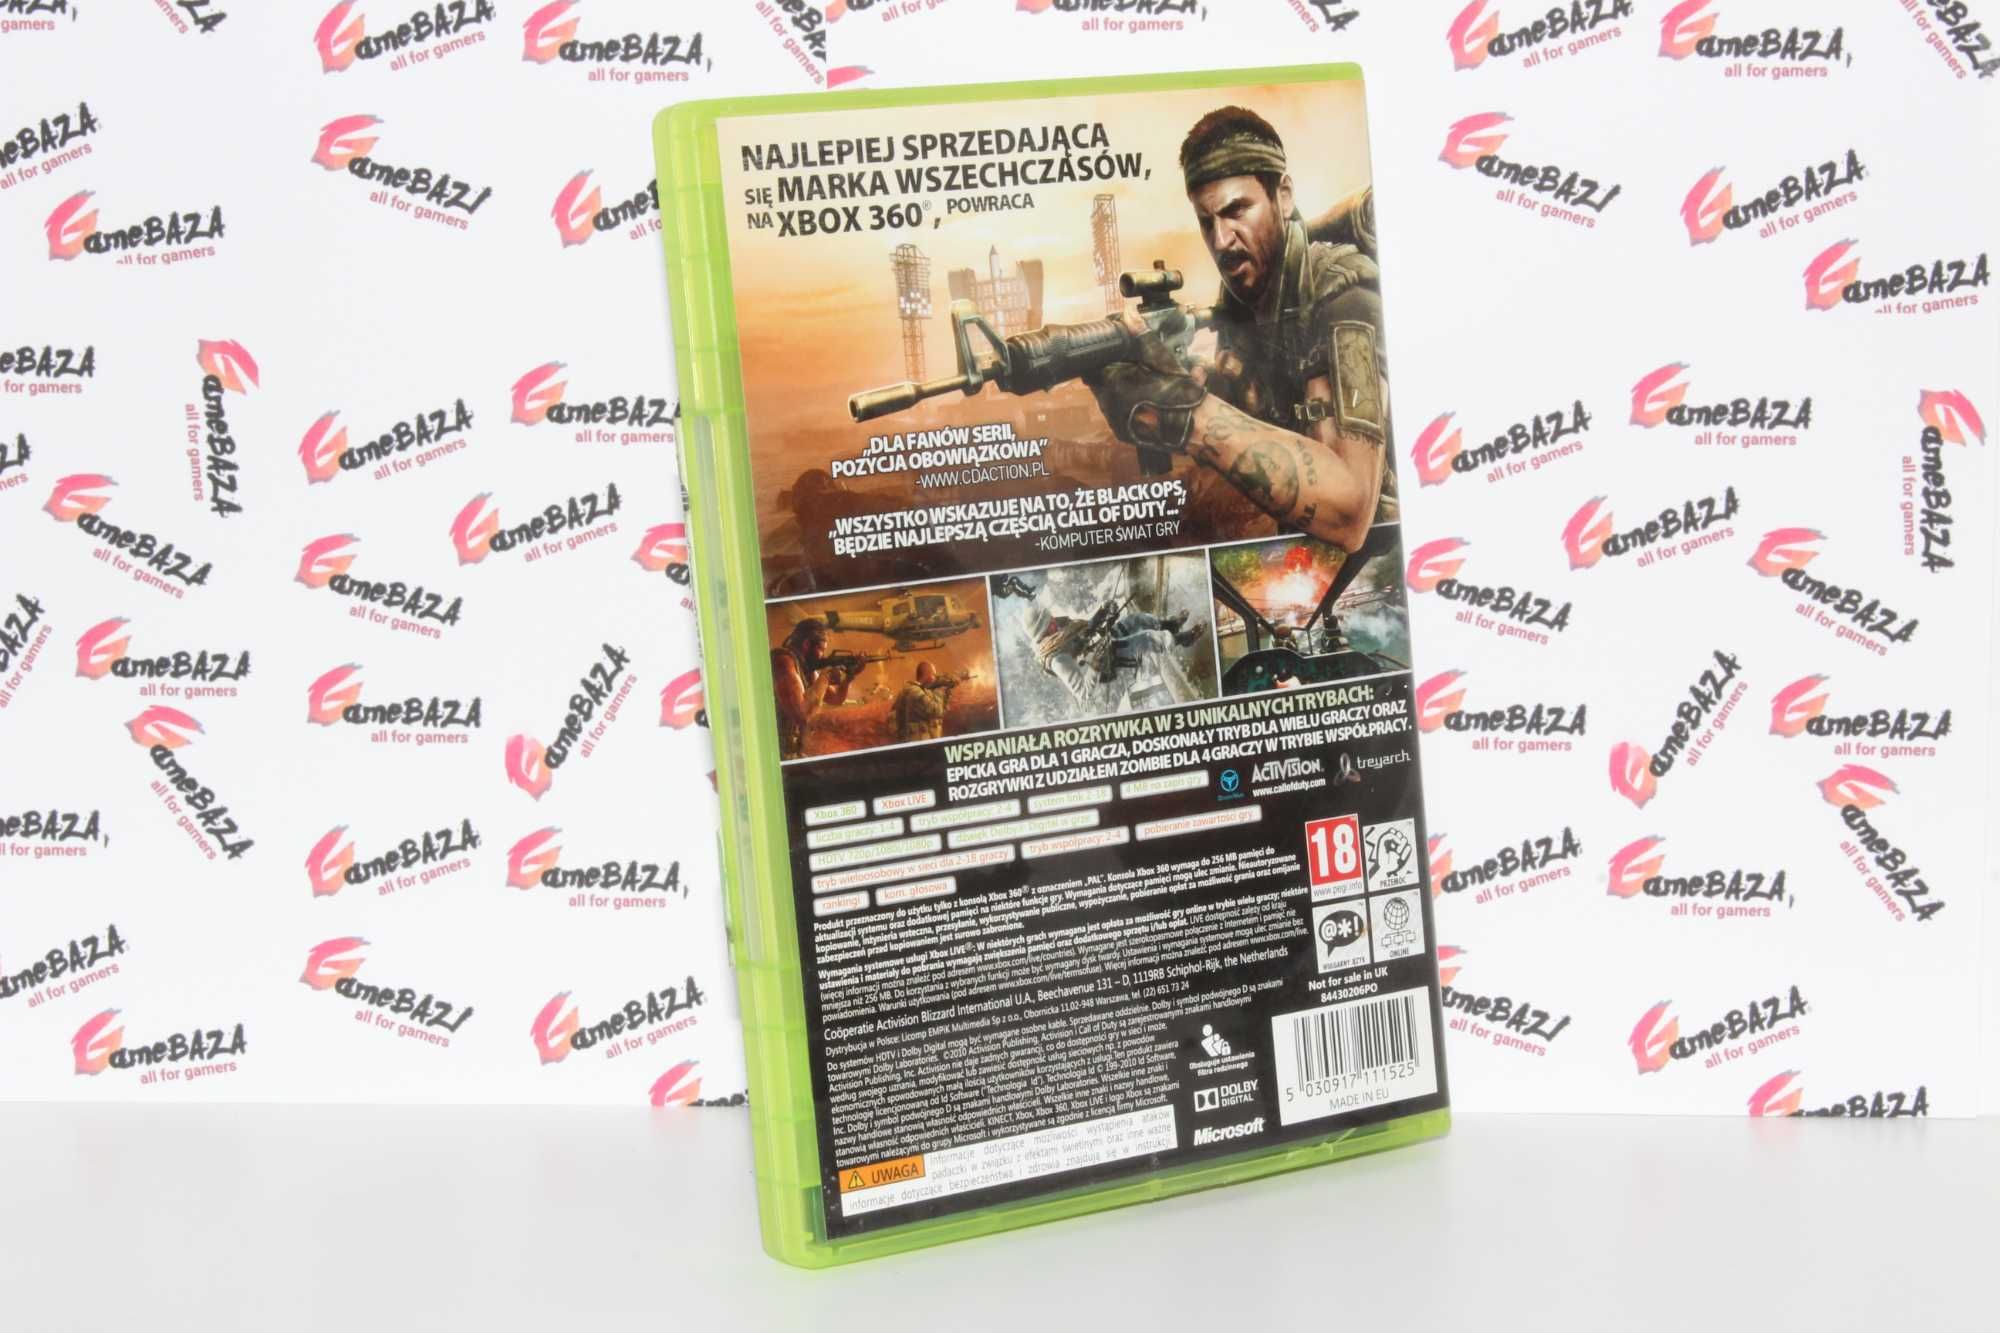 Call of Duty: Black Ops Xbox 360 PL GameBAZA